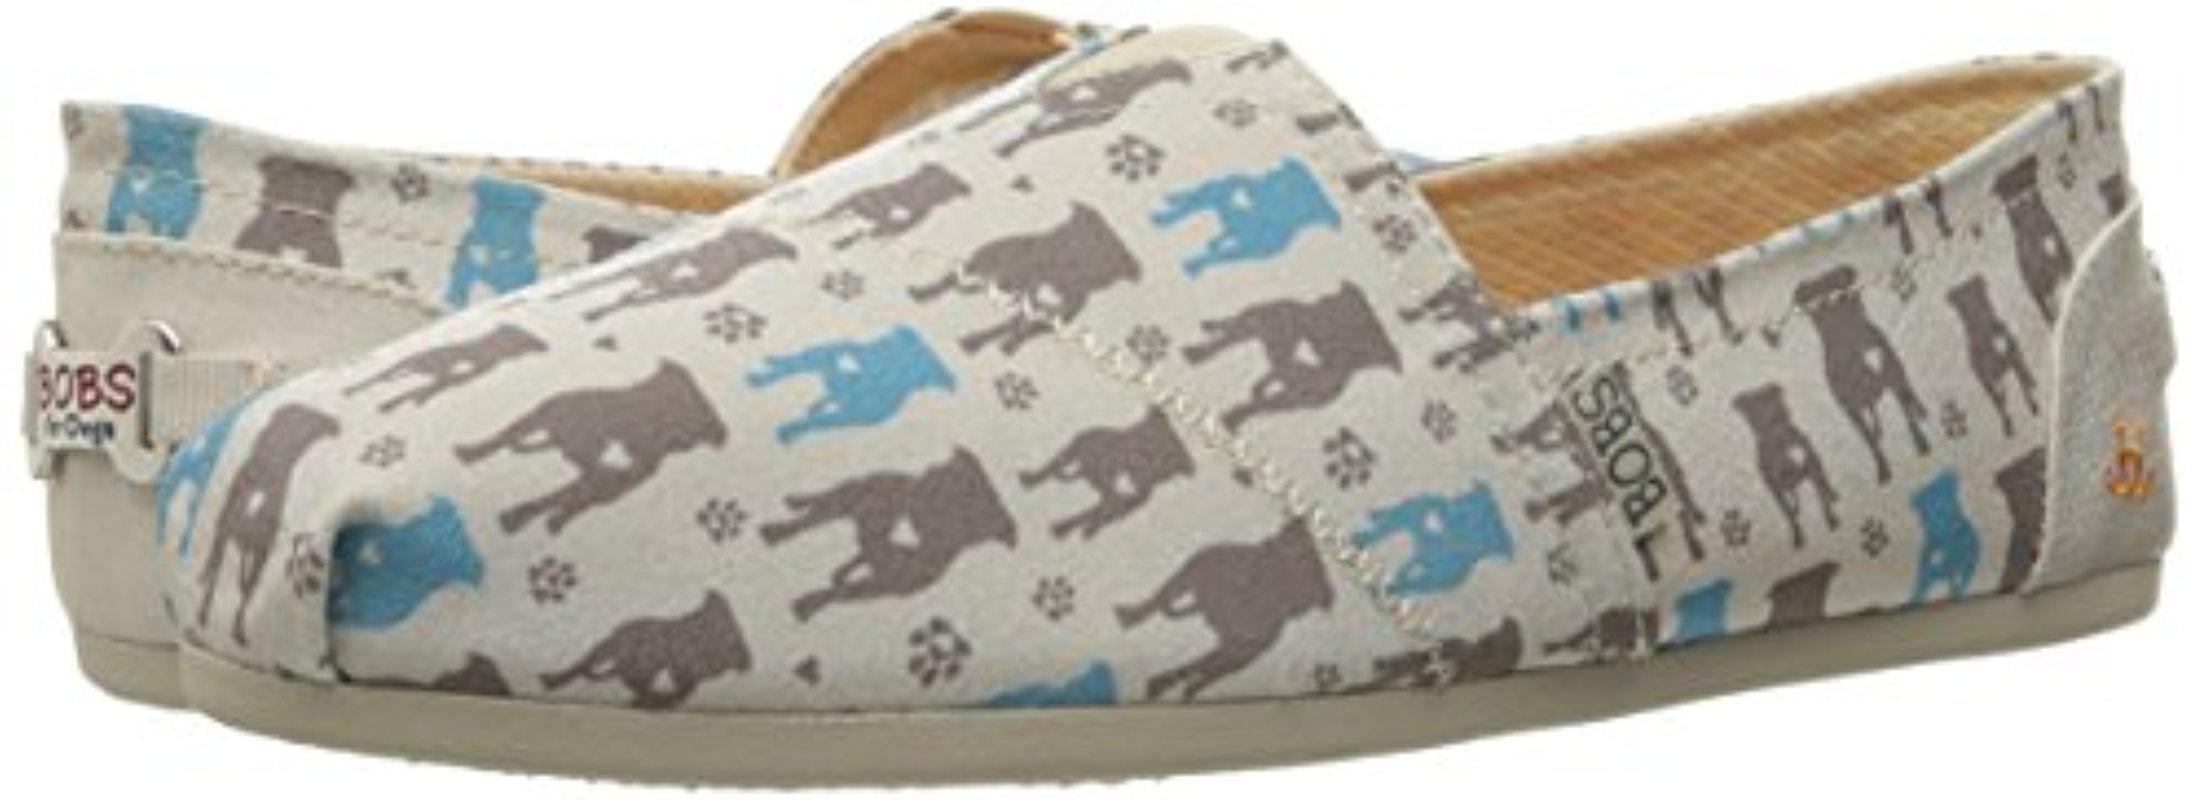 Skechers Bobs From Bobs Plush-gentle Giant Flat, Pitbull Natural, 5 M Us |  Lyst